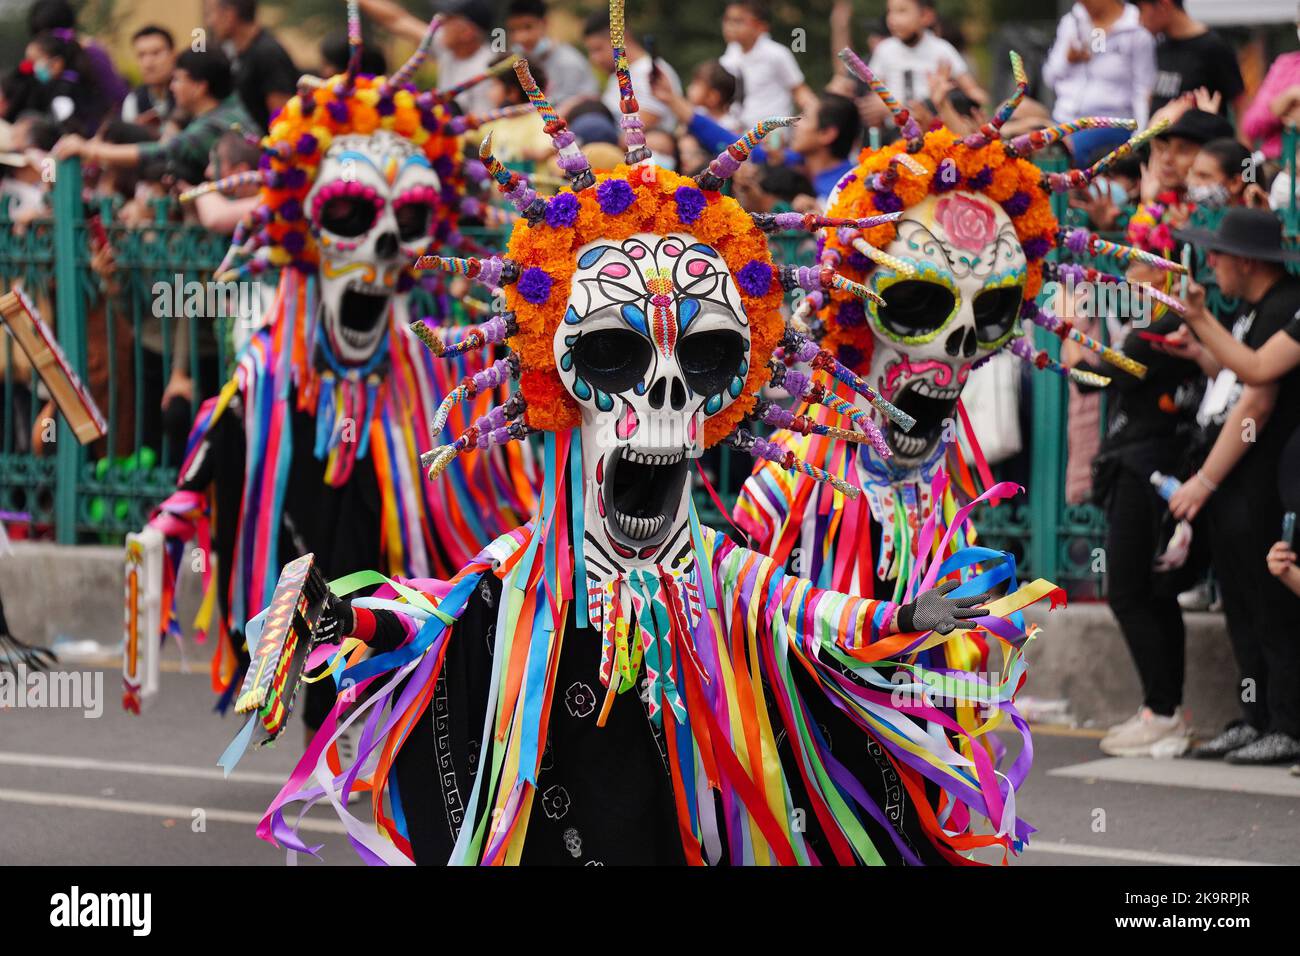 Mexico City, Mexico. 29th Oct, 2022. Performers wearing giant skull masks dance down the street during the Grand Parade of the Dead to celebrate Dia de los Muertos holiday on Paseo de la Reforma, October 29, 2022 in Mexico City, Mexico. Credit: Richard Ellis/Richard Ellis/Alamy Live News Stock Photo